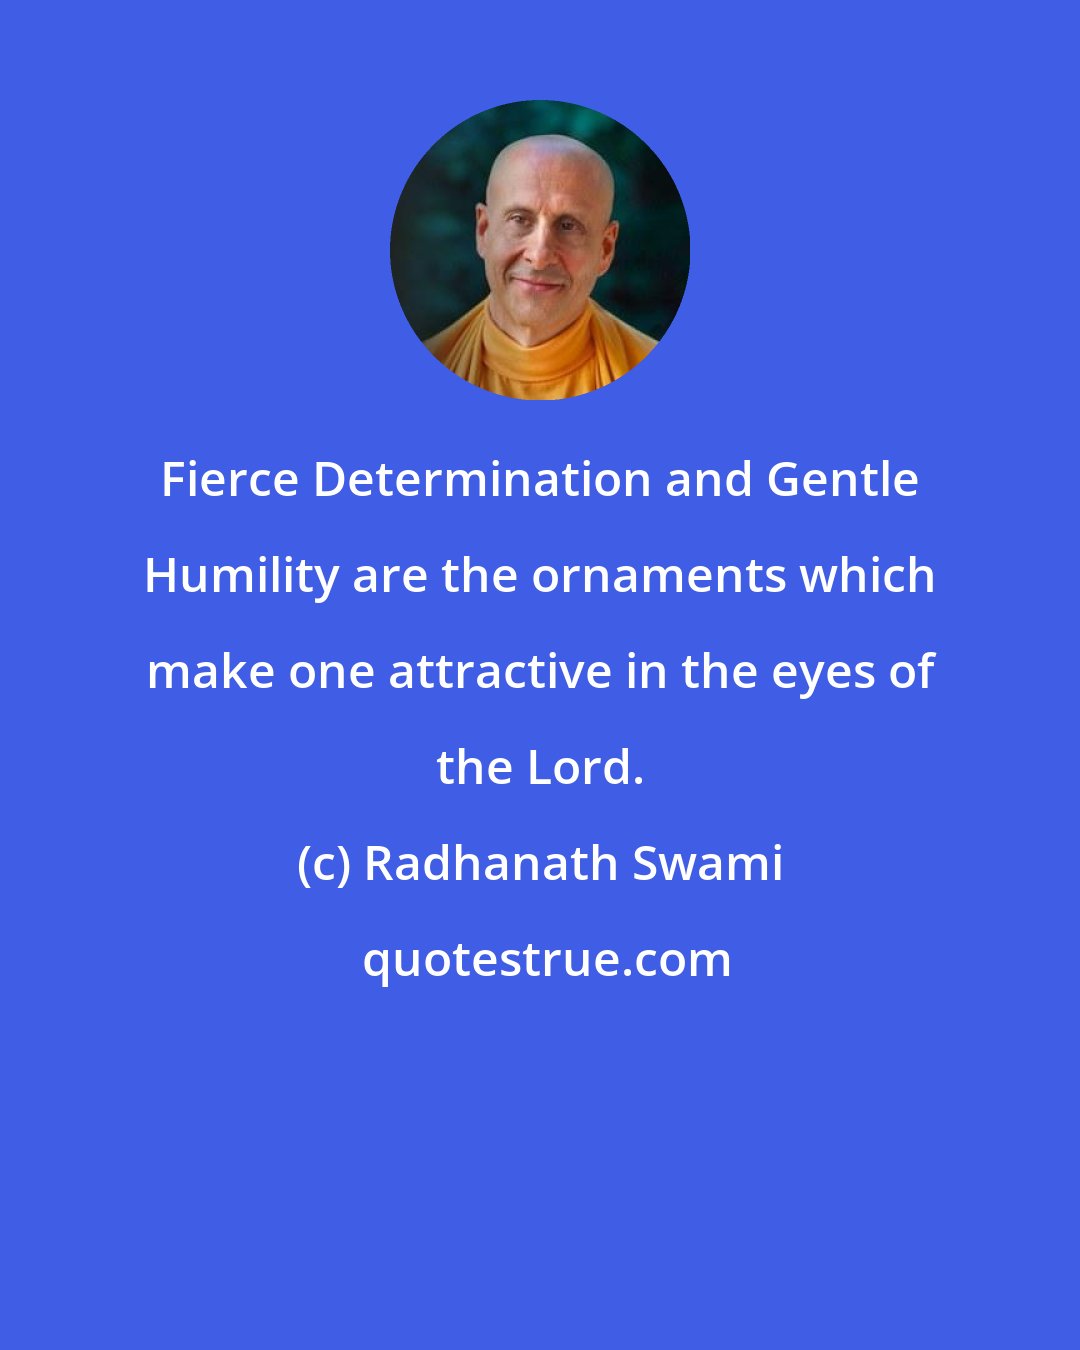 Radhanath Swami: Fierce Determination and Gentle Humility are the ornaments which make one attractive in the eyes of the Lord.